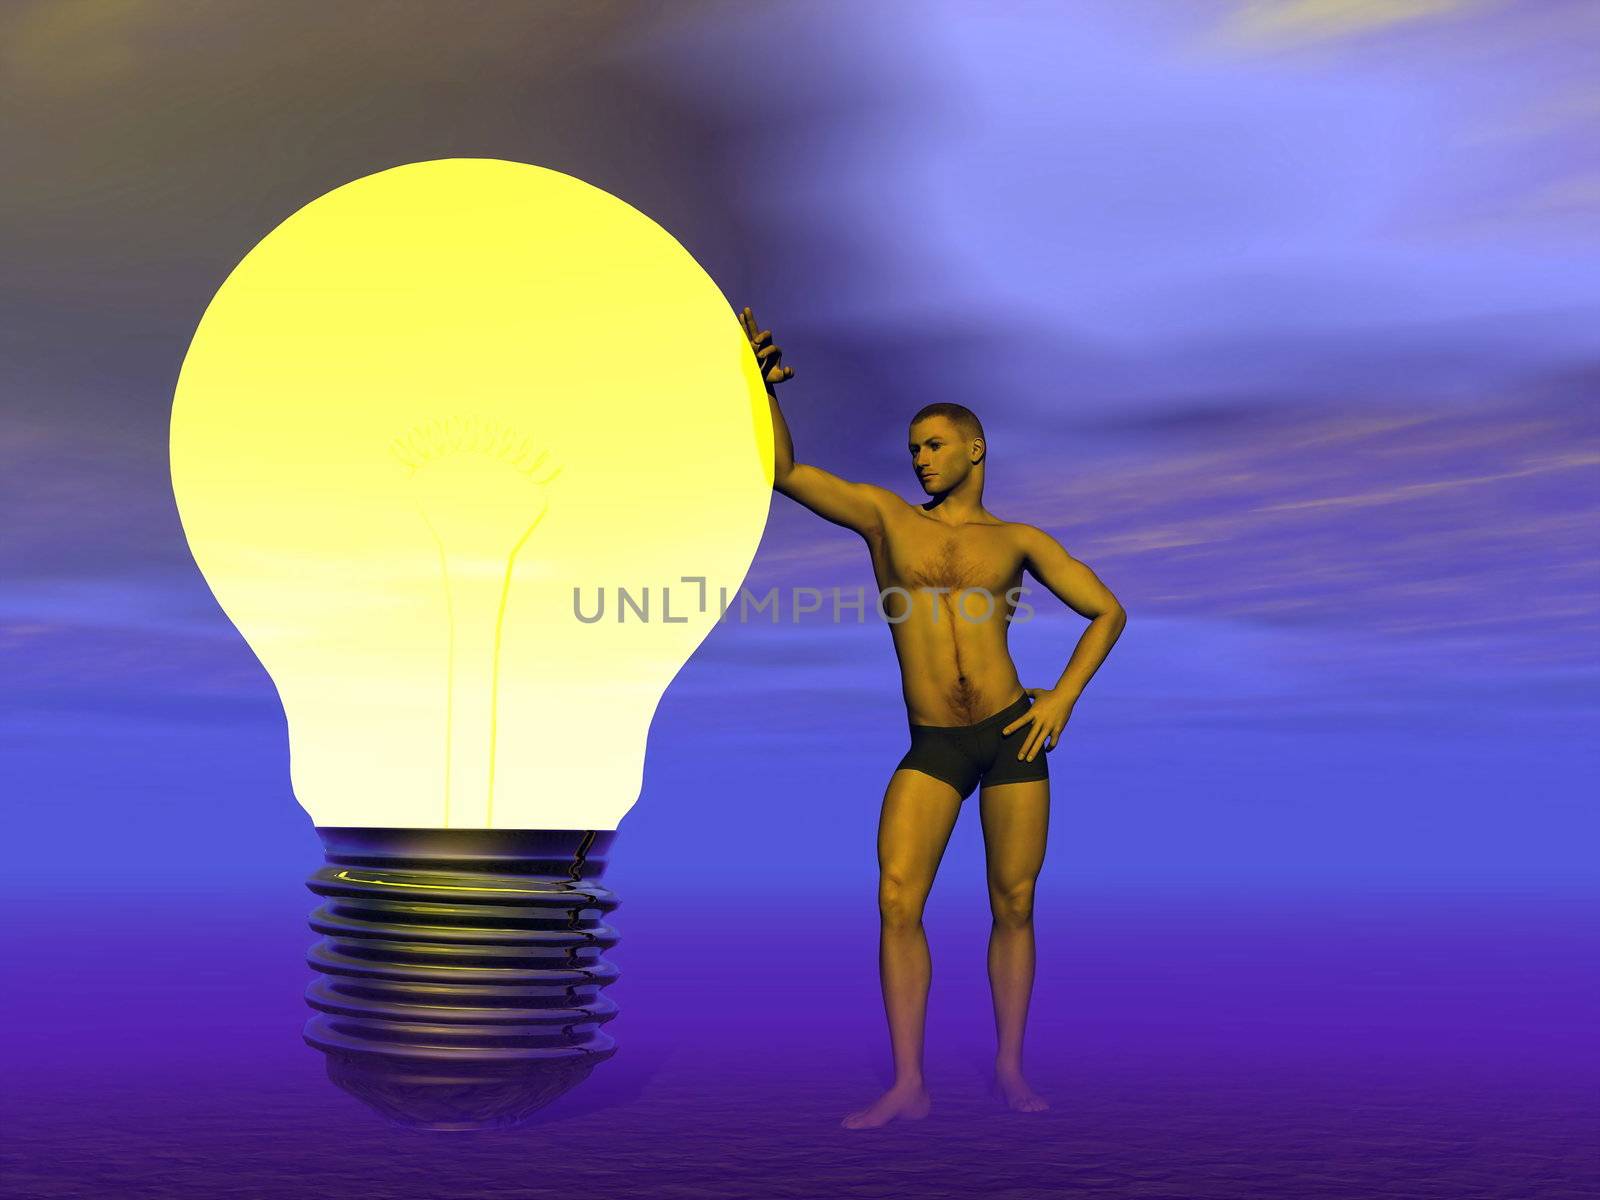 A man leaning against a light bulb on asking for an idea or happy to have it